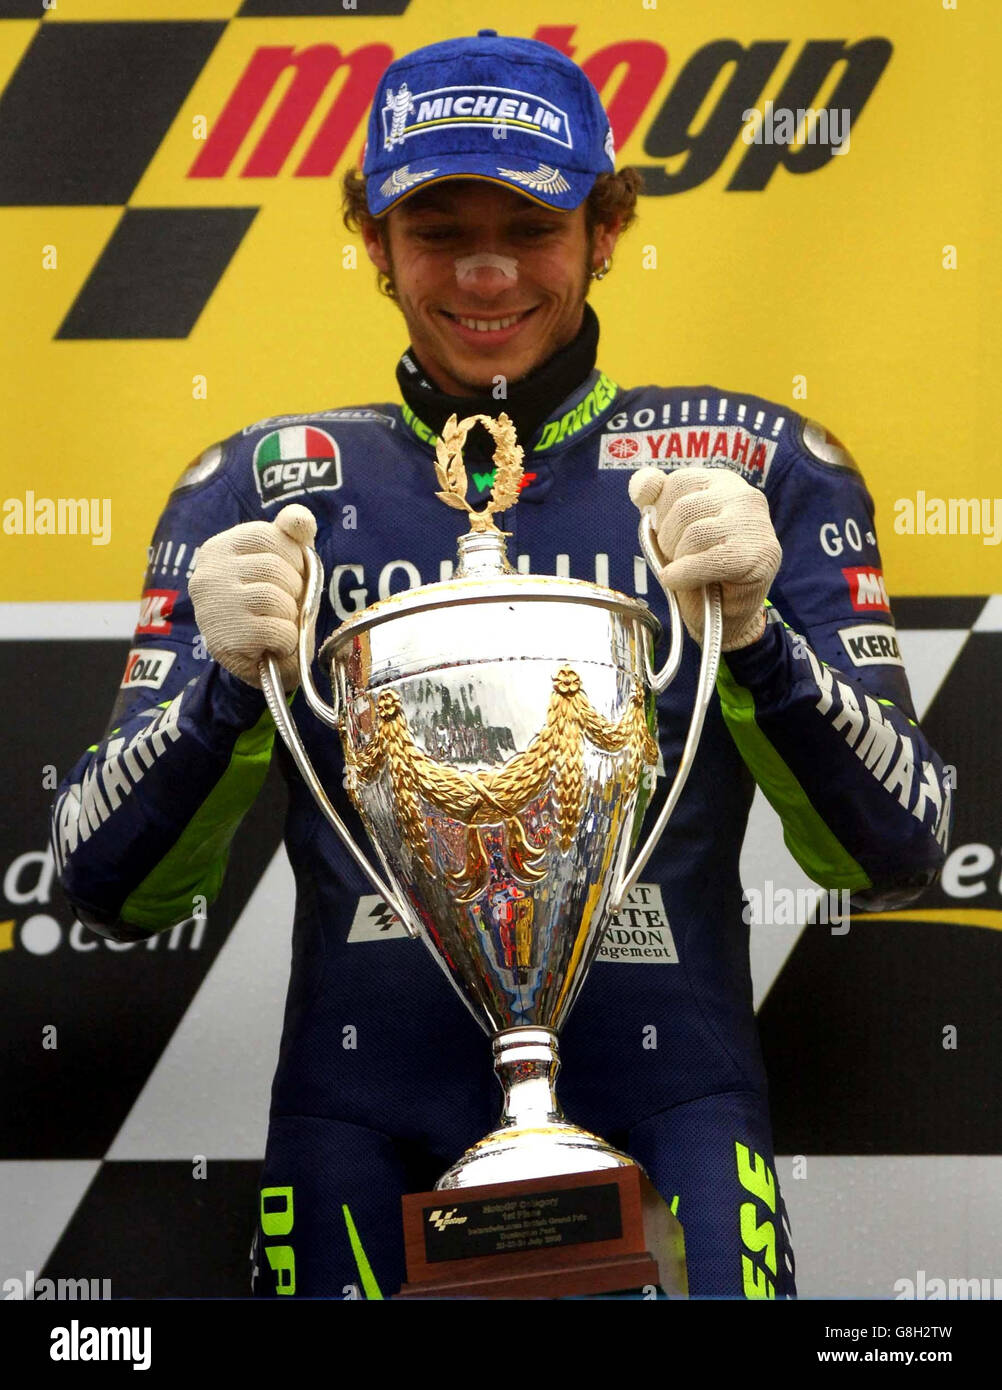 Italy's Valentino Rossi celebrates with the trophy after winning the  British Moto Grand Prix Stock Photo - Alamy